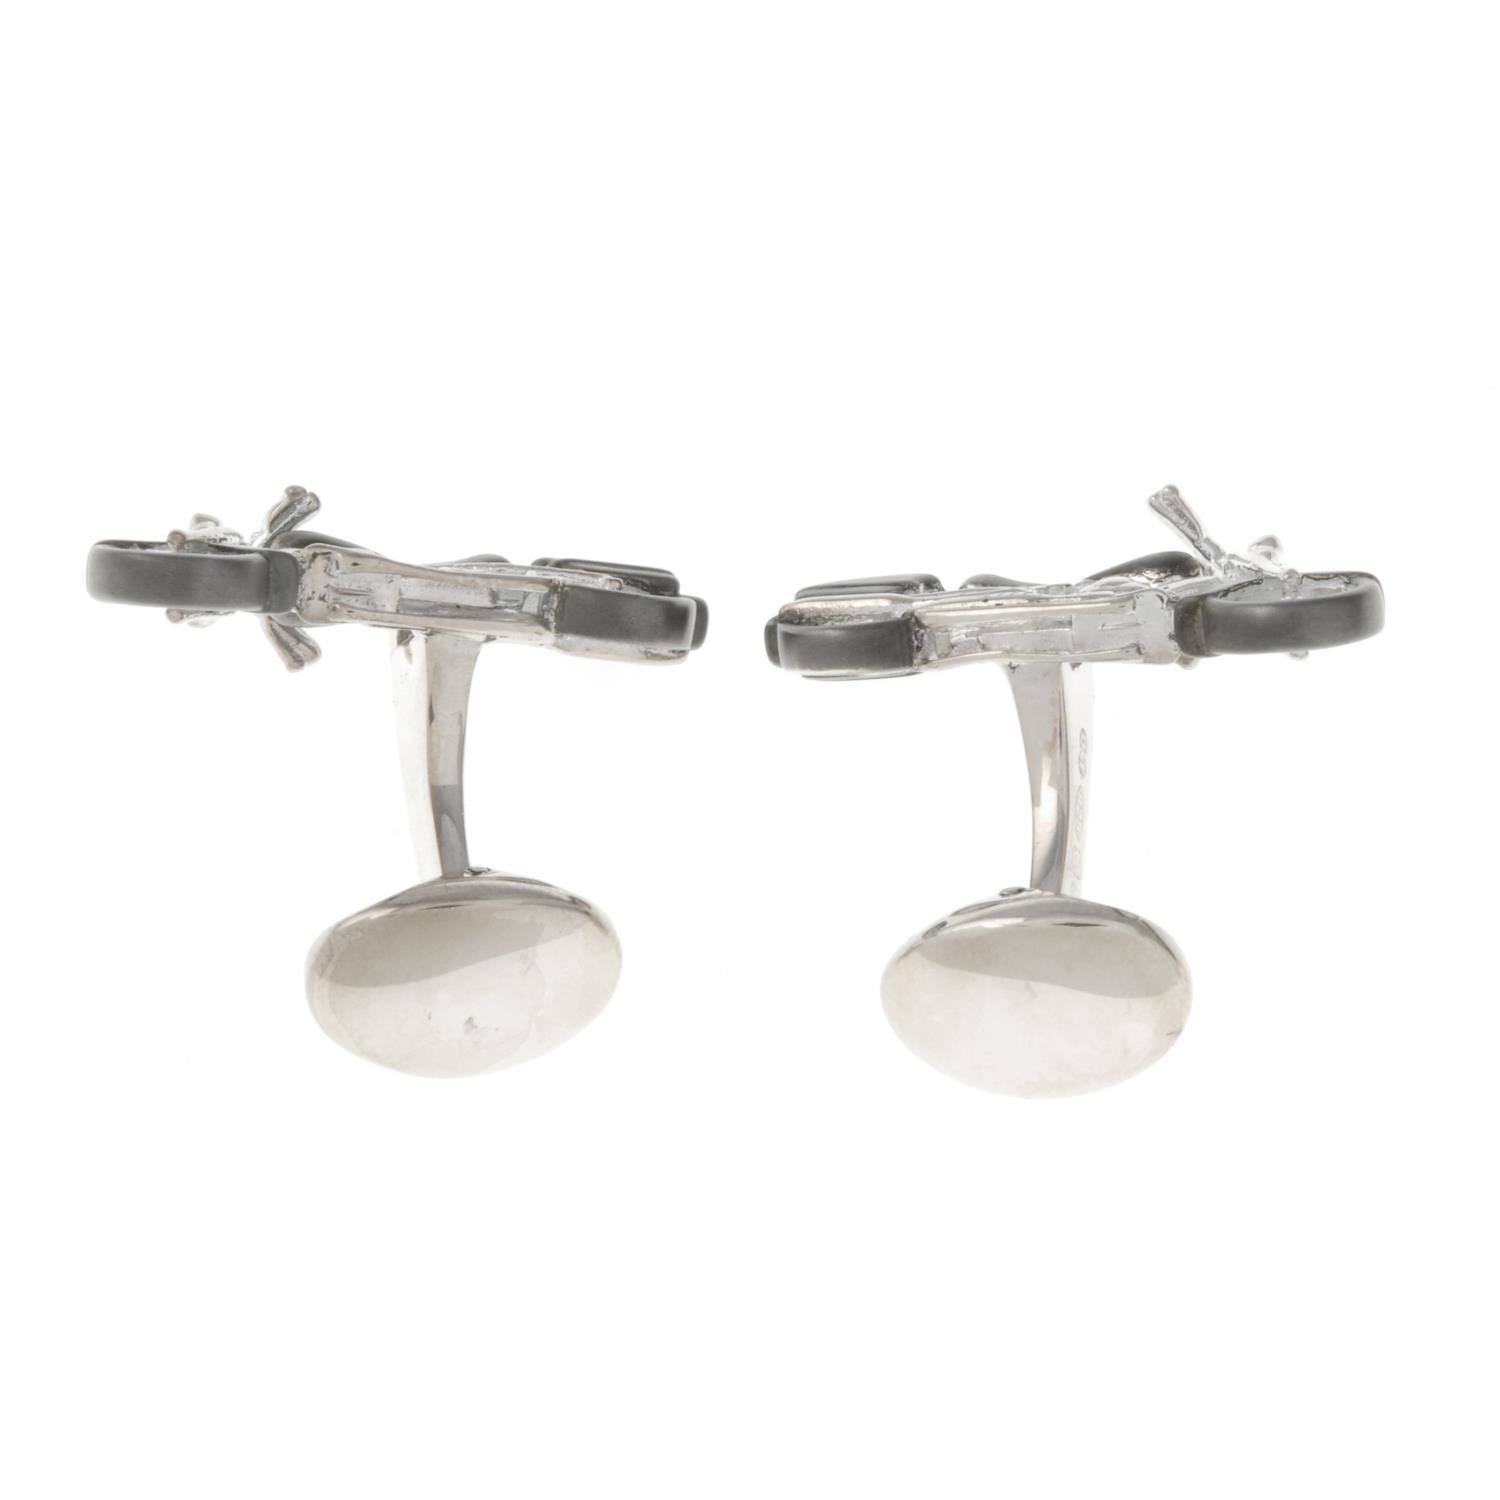 A pair of silver motorcycle cufflinks, by Deakin and Francis.Signed D&F. - Image 3 of 3